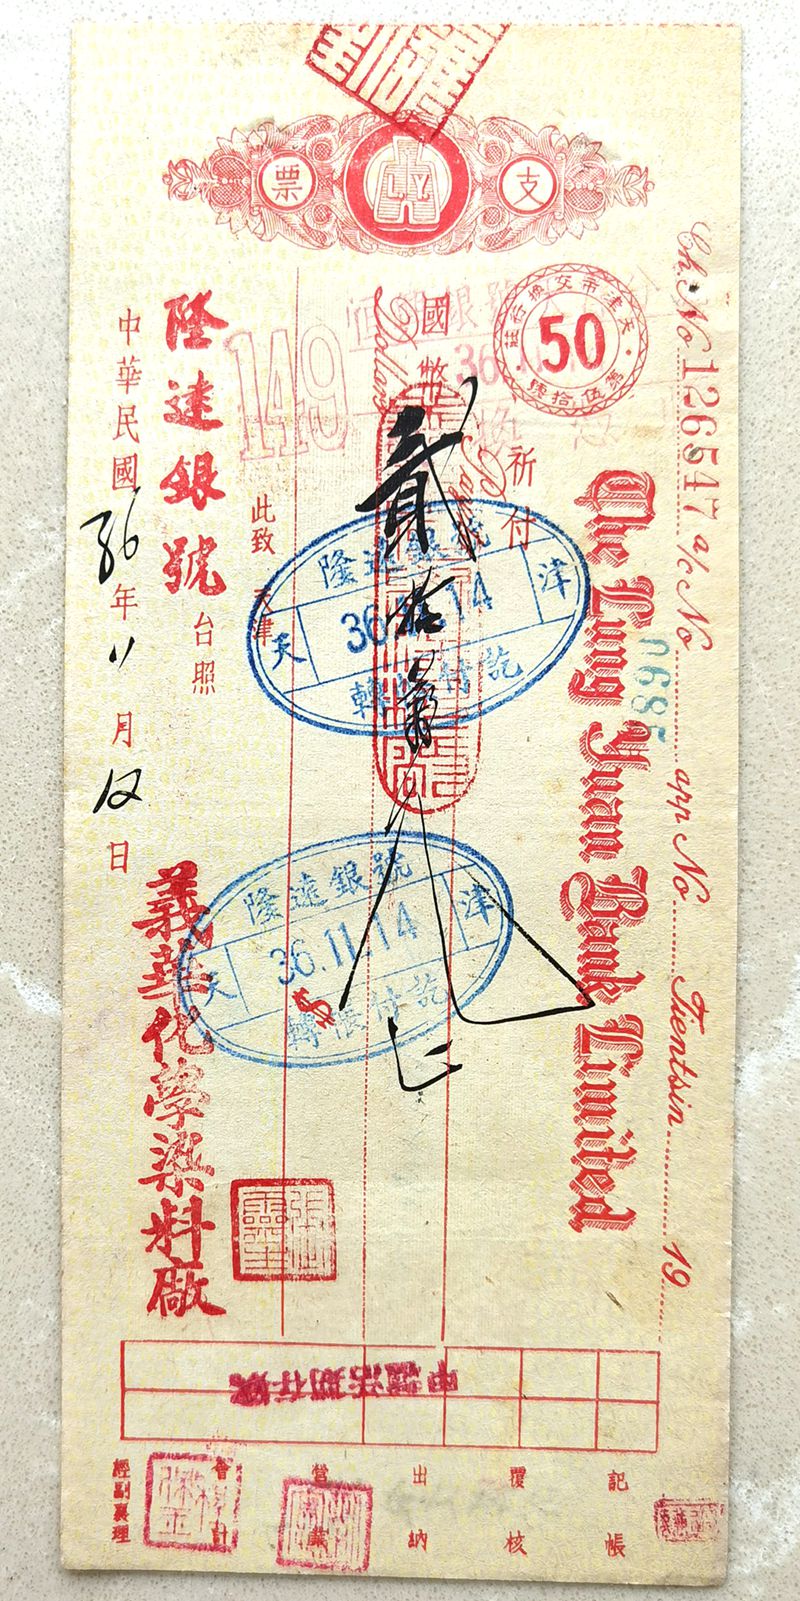 D1798, Check of Lung Yuan Bank, China Tientsin, 1947 Cheque.